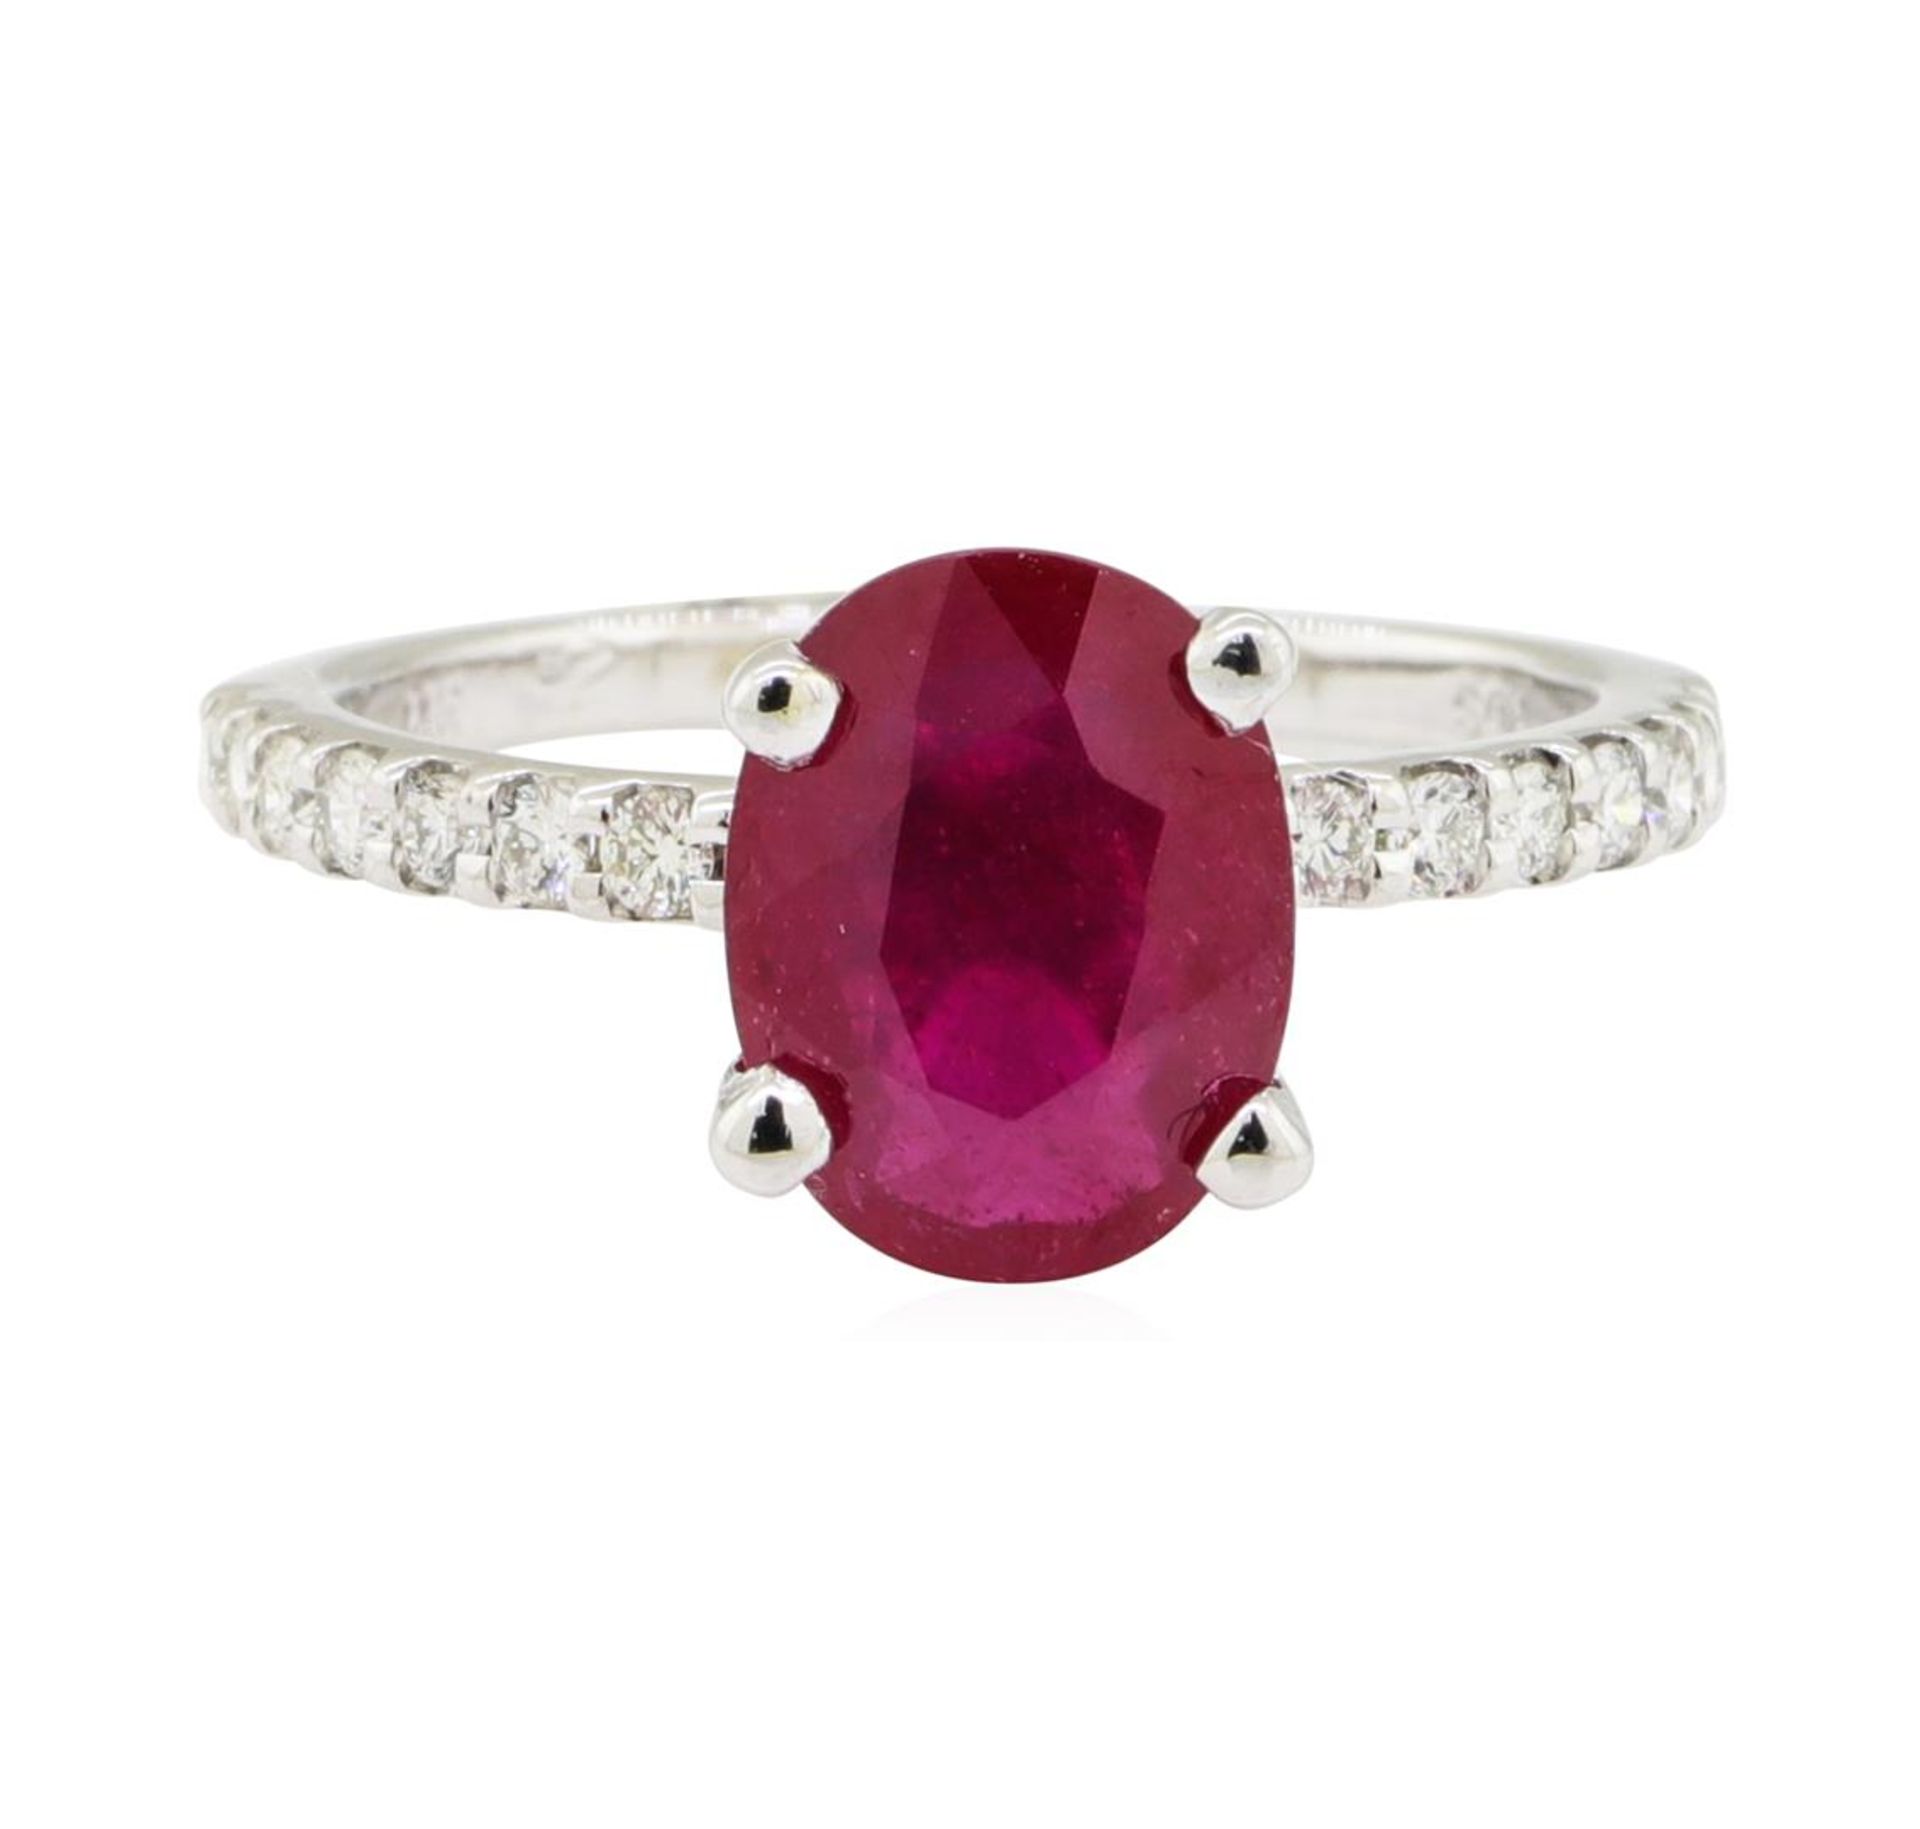 2.38 ctw Glass Filled Natural Ruby and Diamond Ring - 14KT White Gold - Image 2 of 4